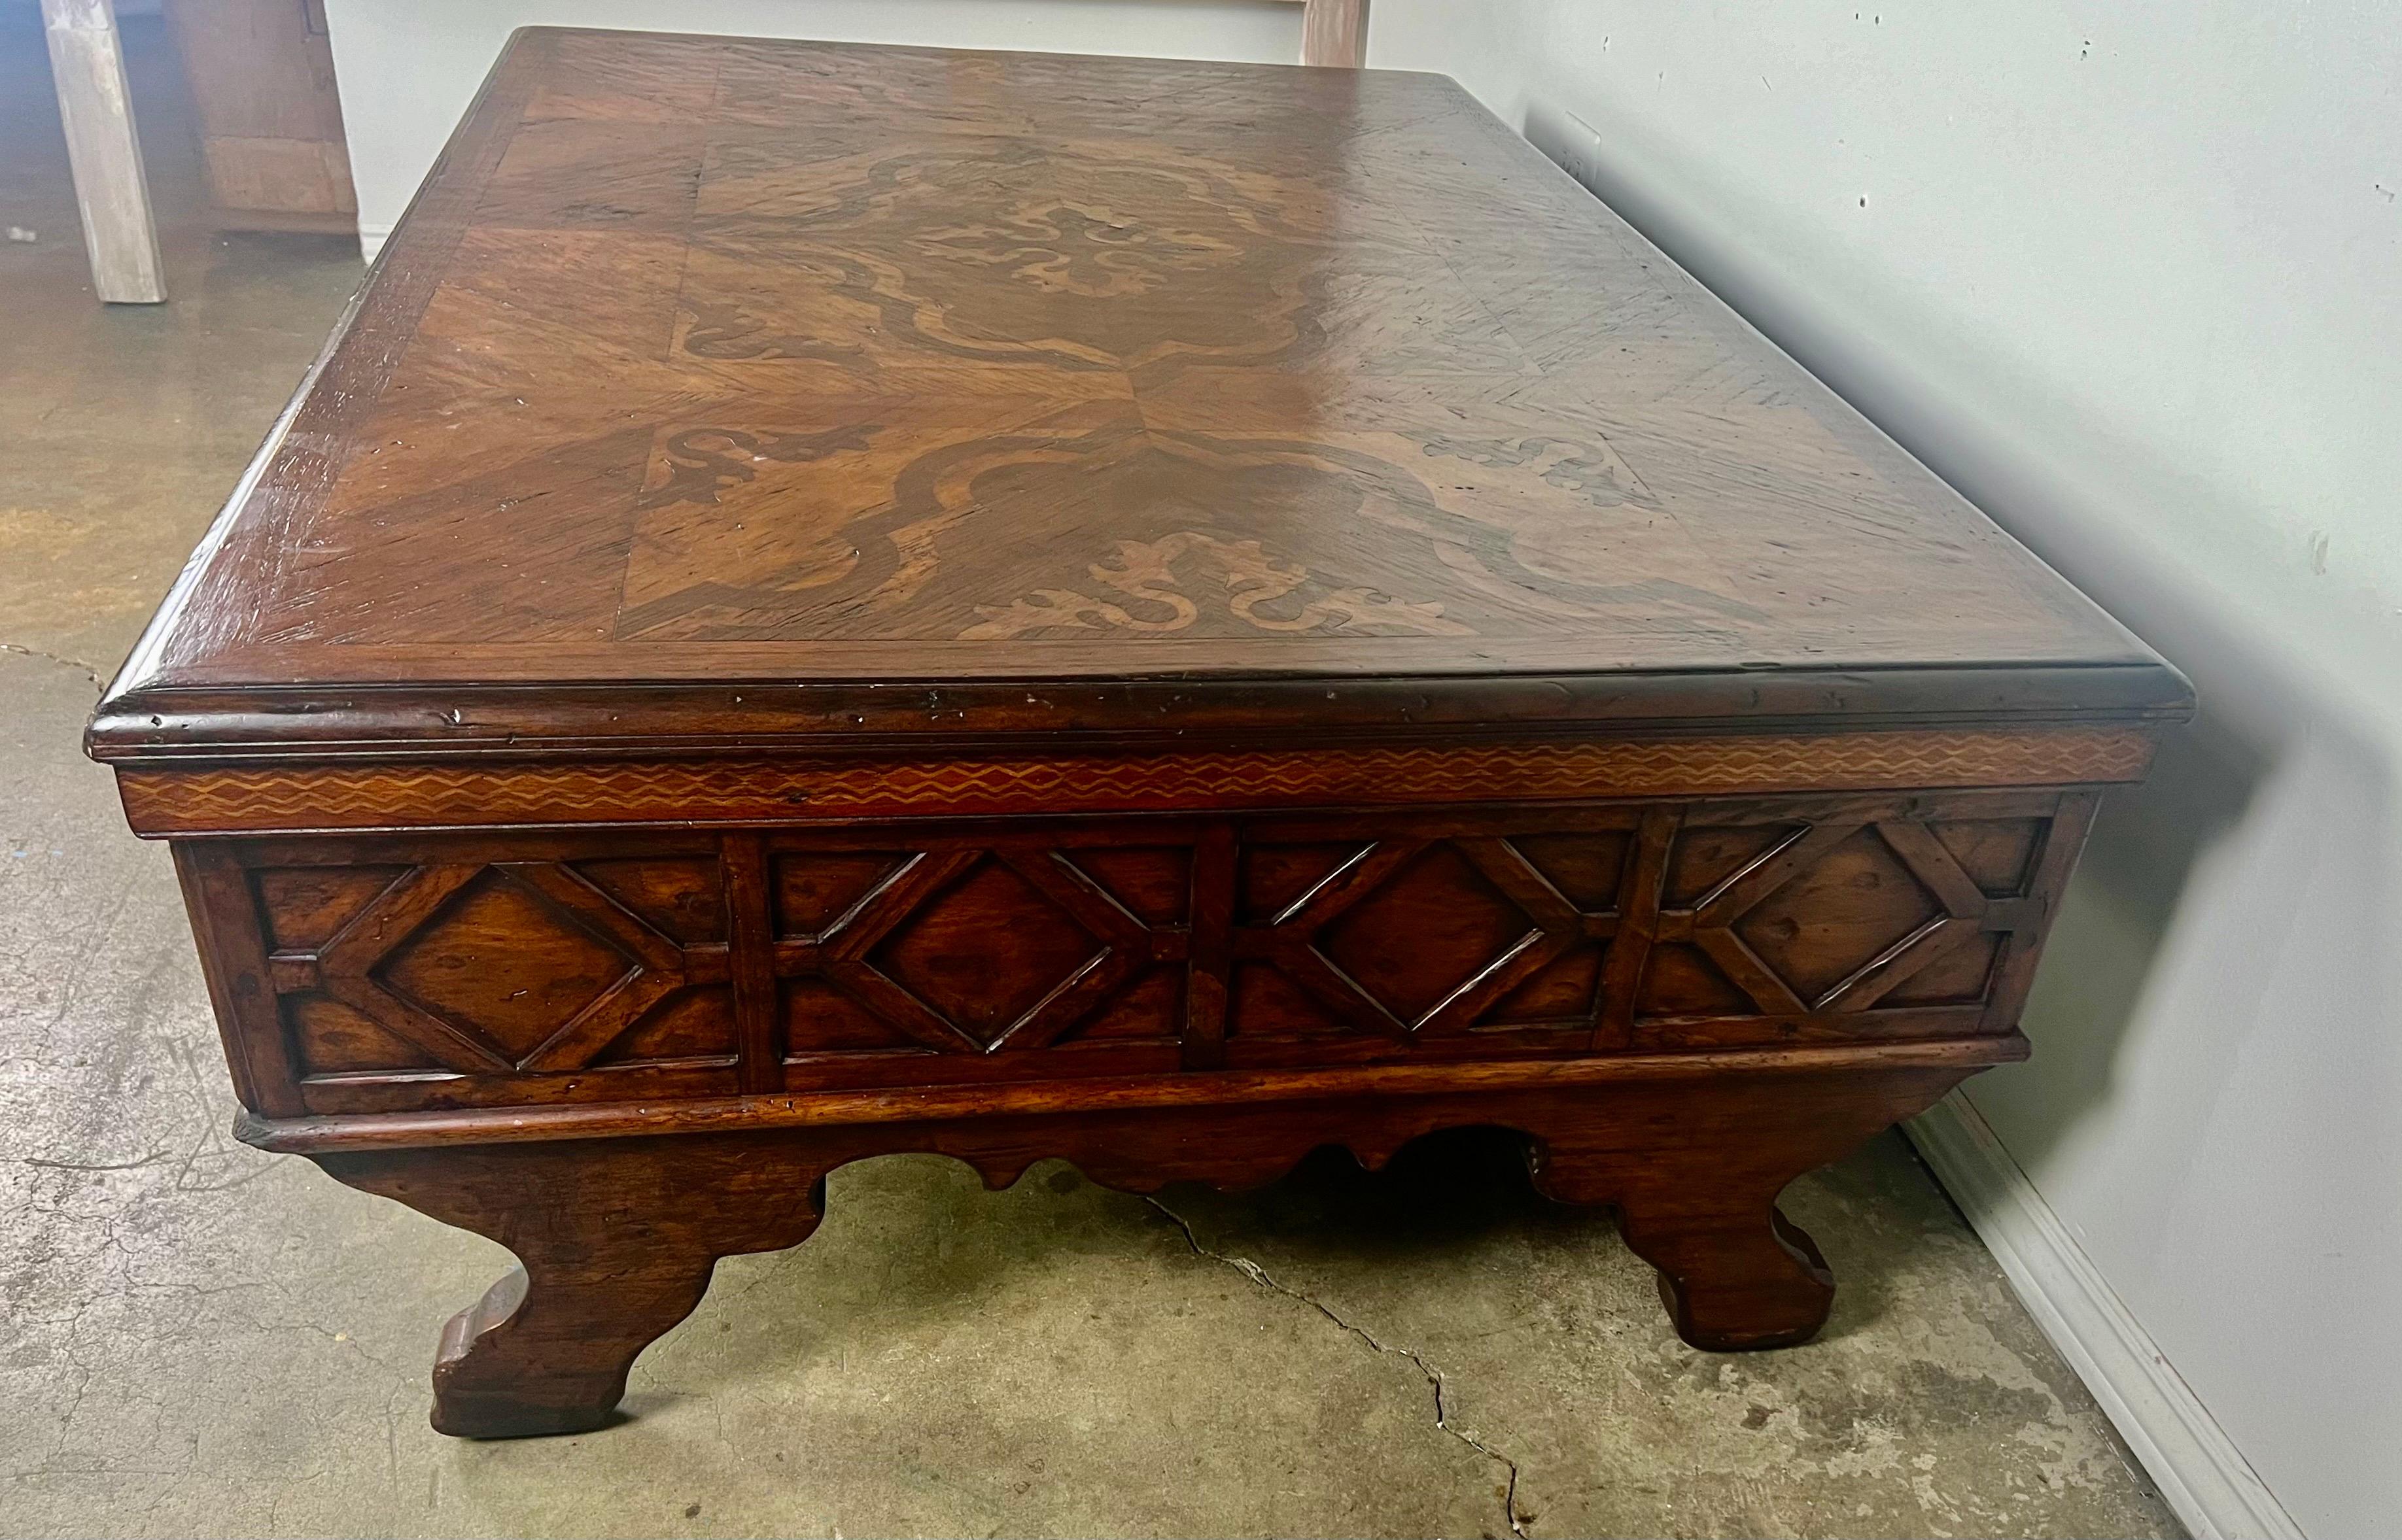 Monumental Spanish Inlaid Coffee Table w/ Drawers For Sale 5